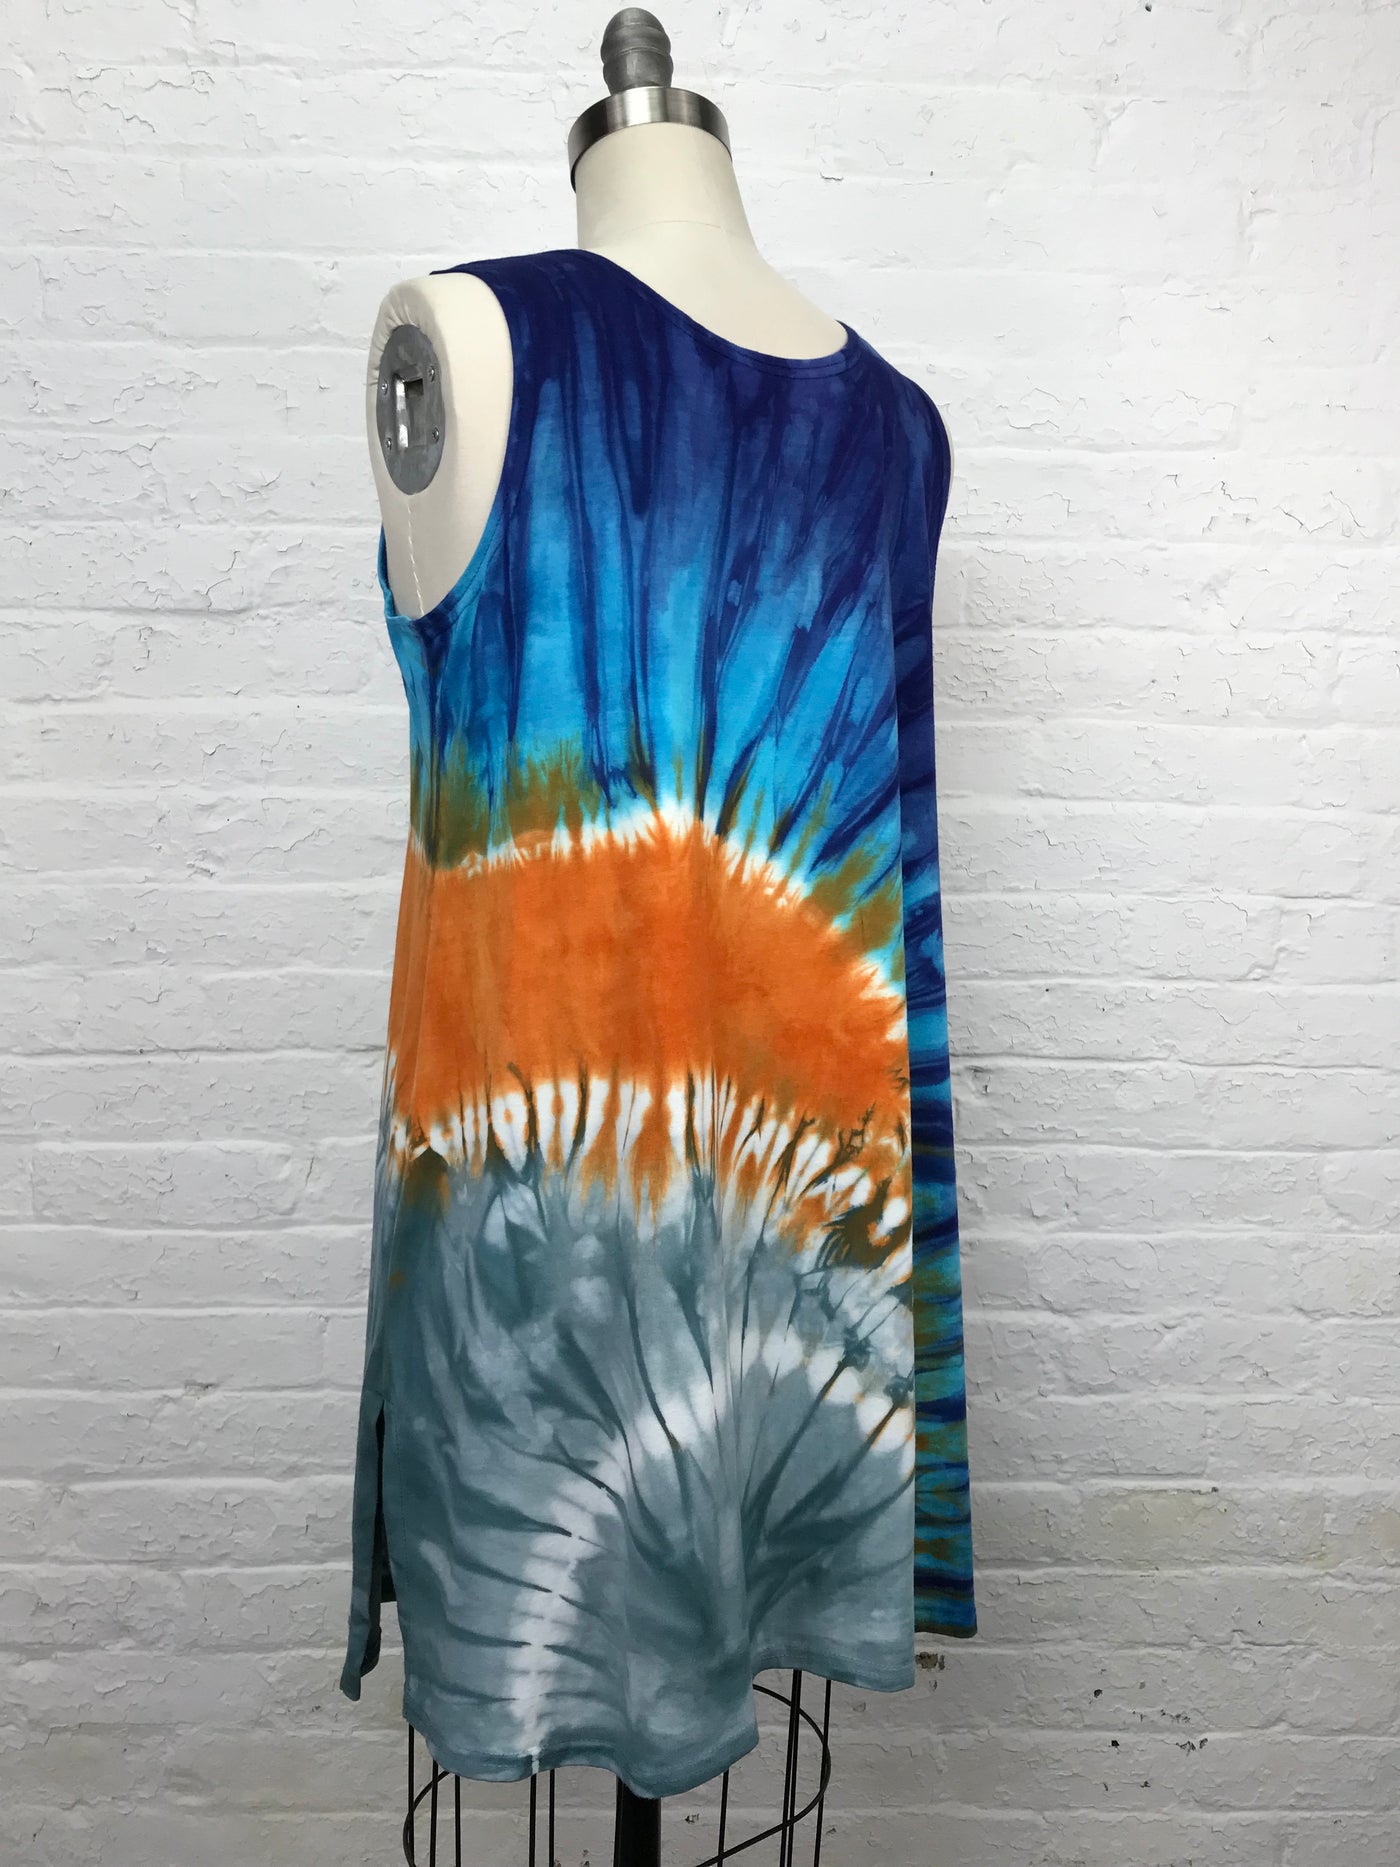 Eileen Mini Tank Tunic in Sunrise Over Clouds - back view